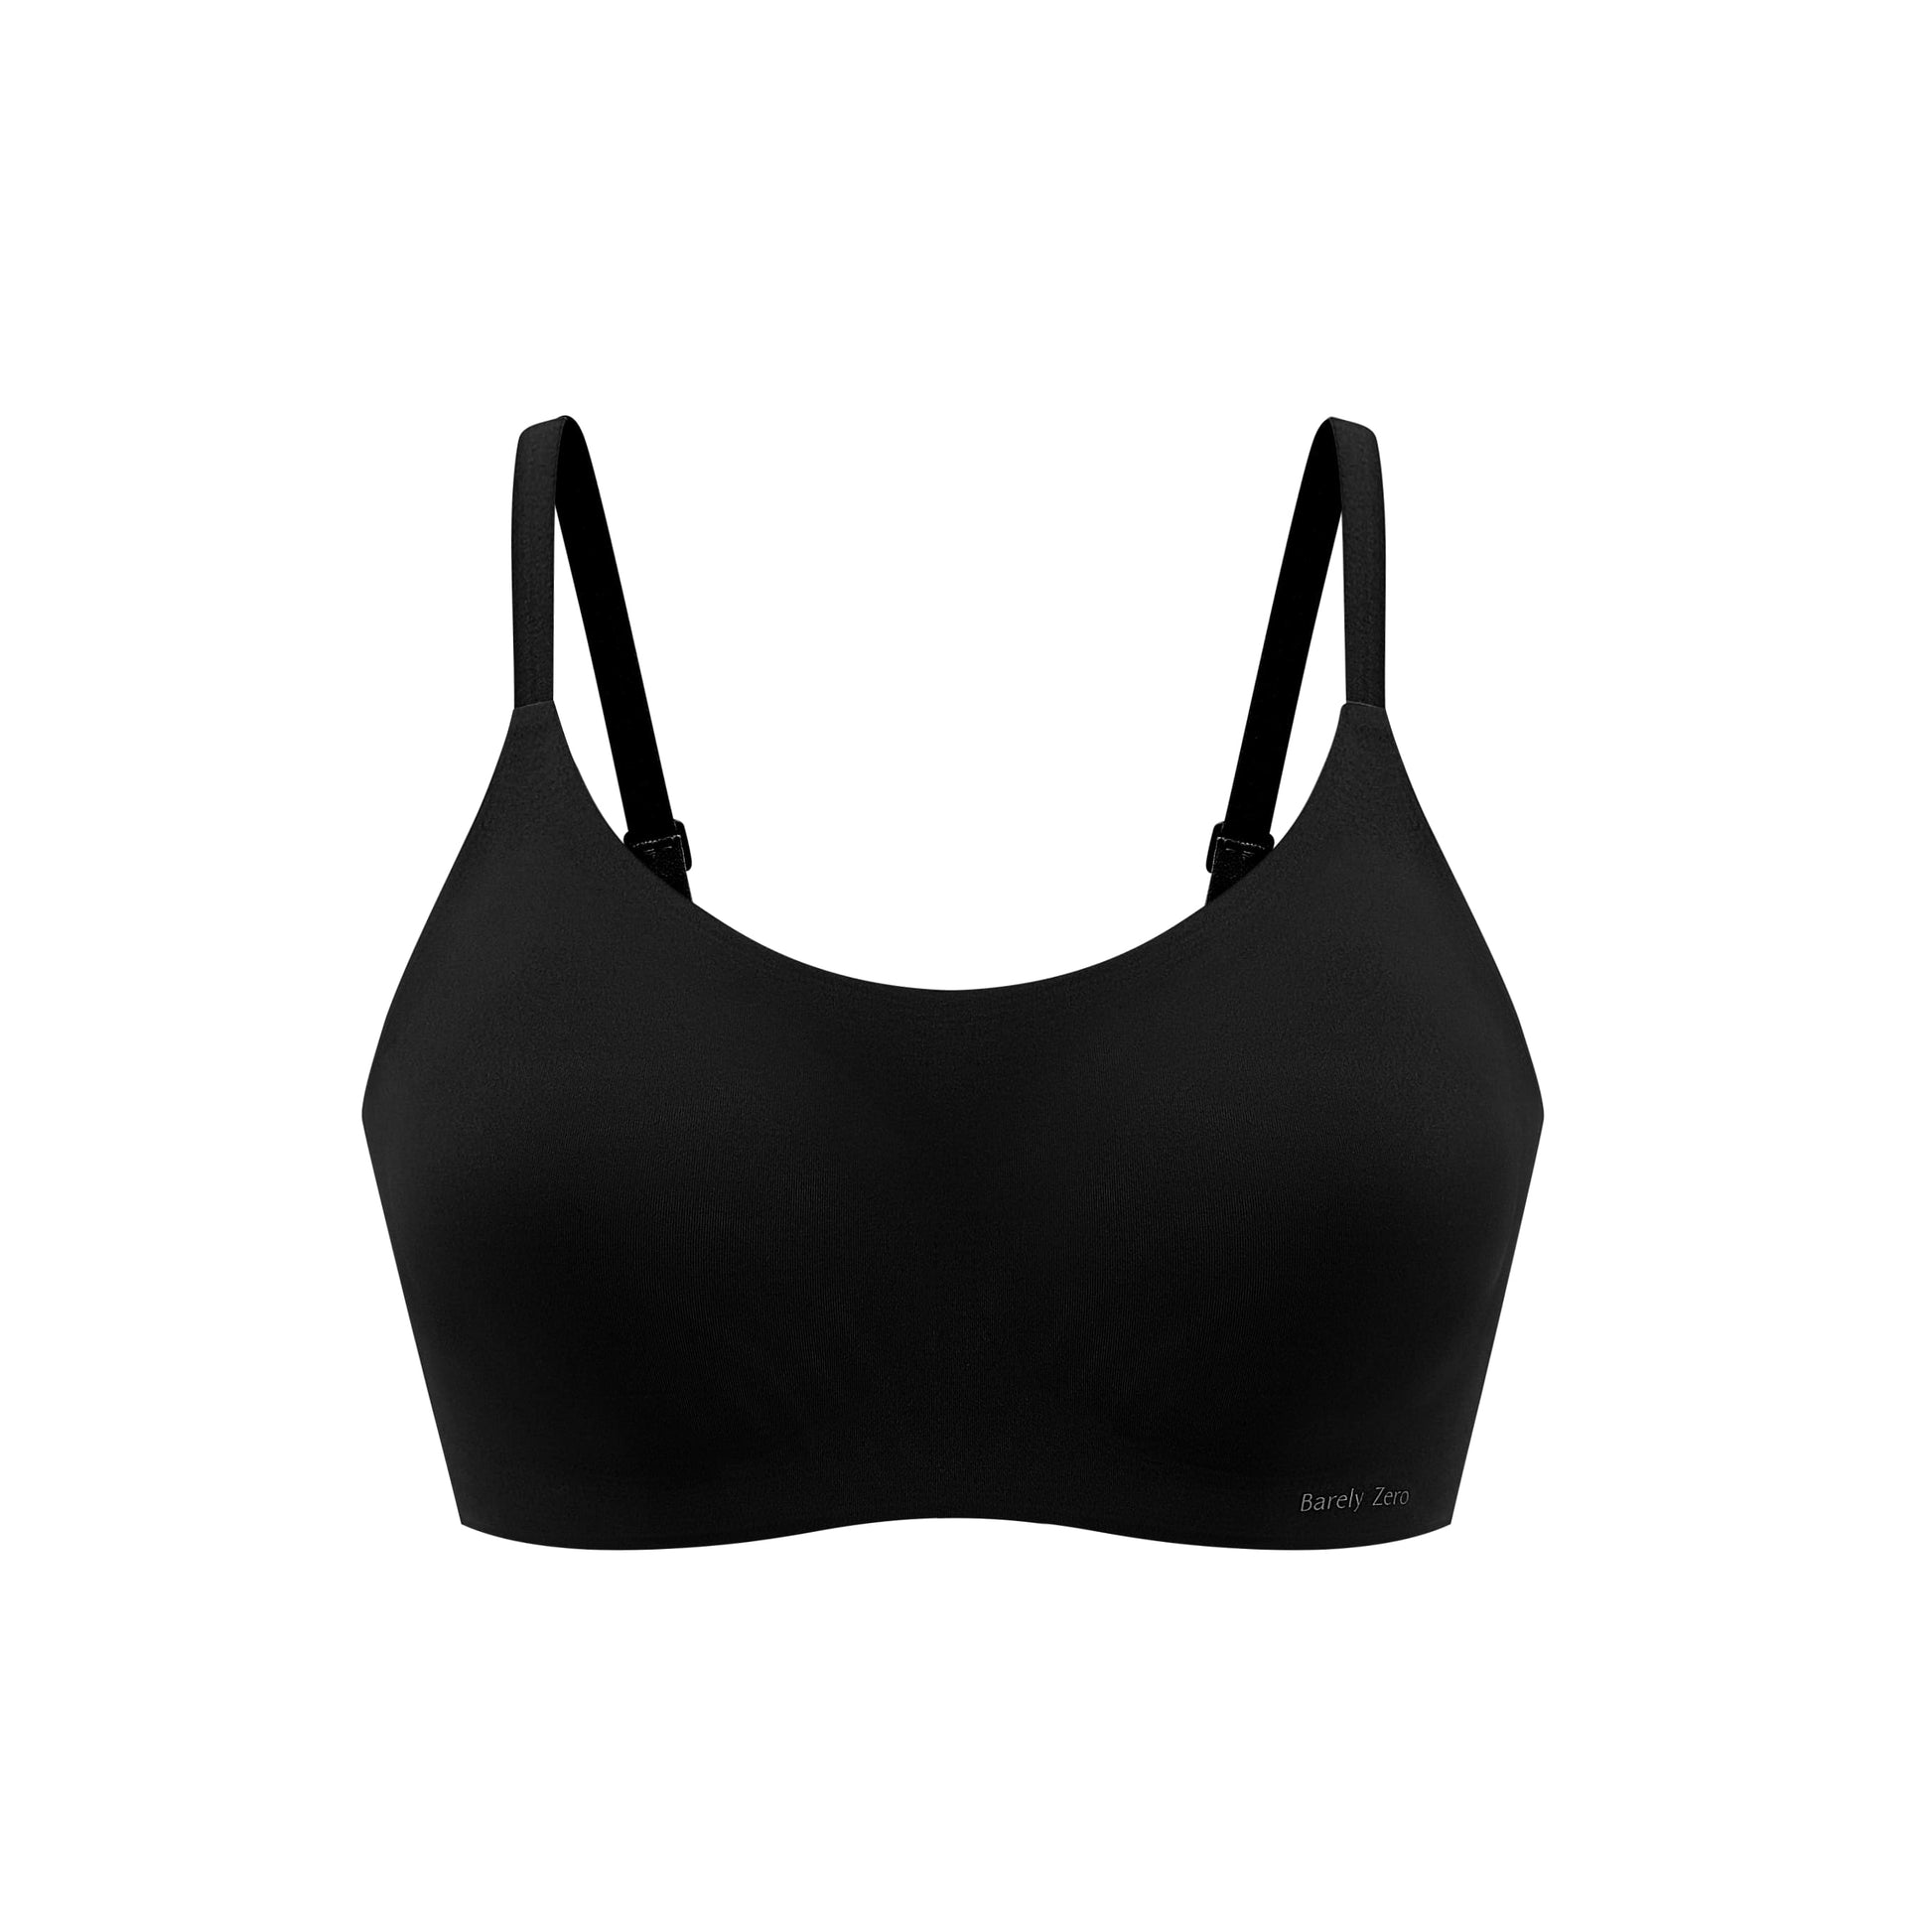 Stoked about the @neiwaiofficial barely zero bra! This is a game